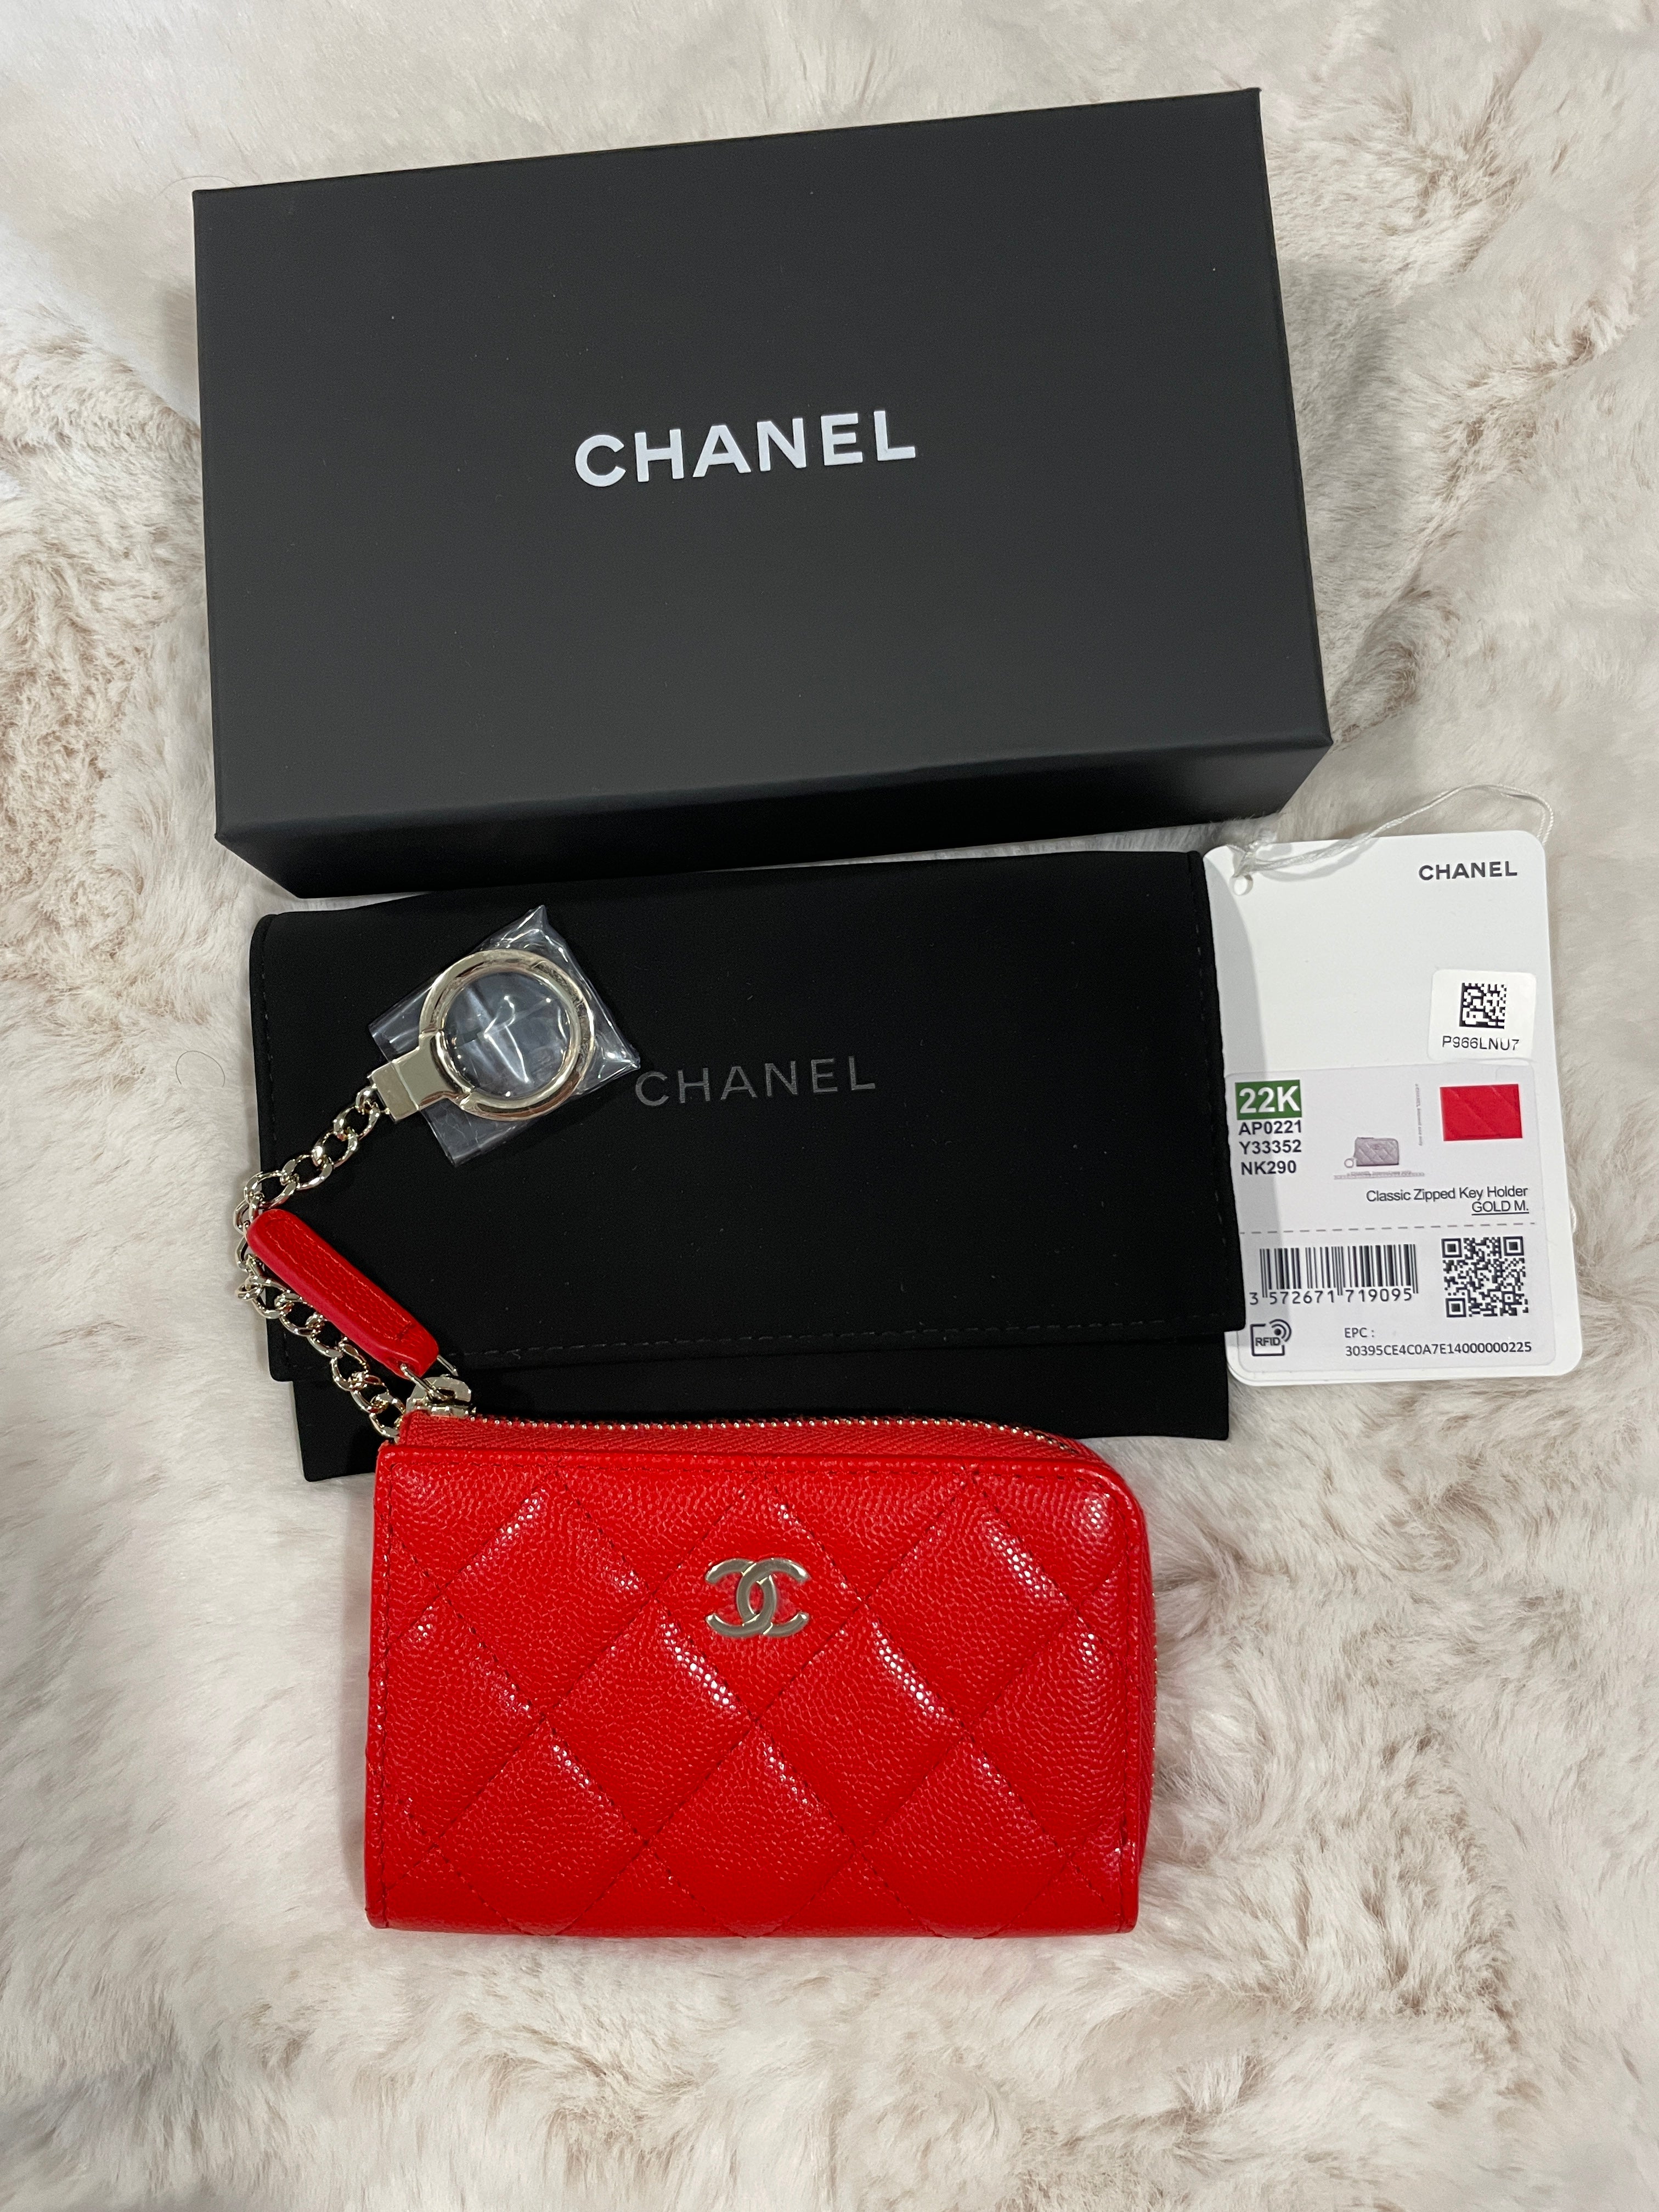 Chanel 22K Red Caviar Key Wallet – The Millionaires Closet